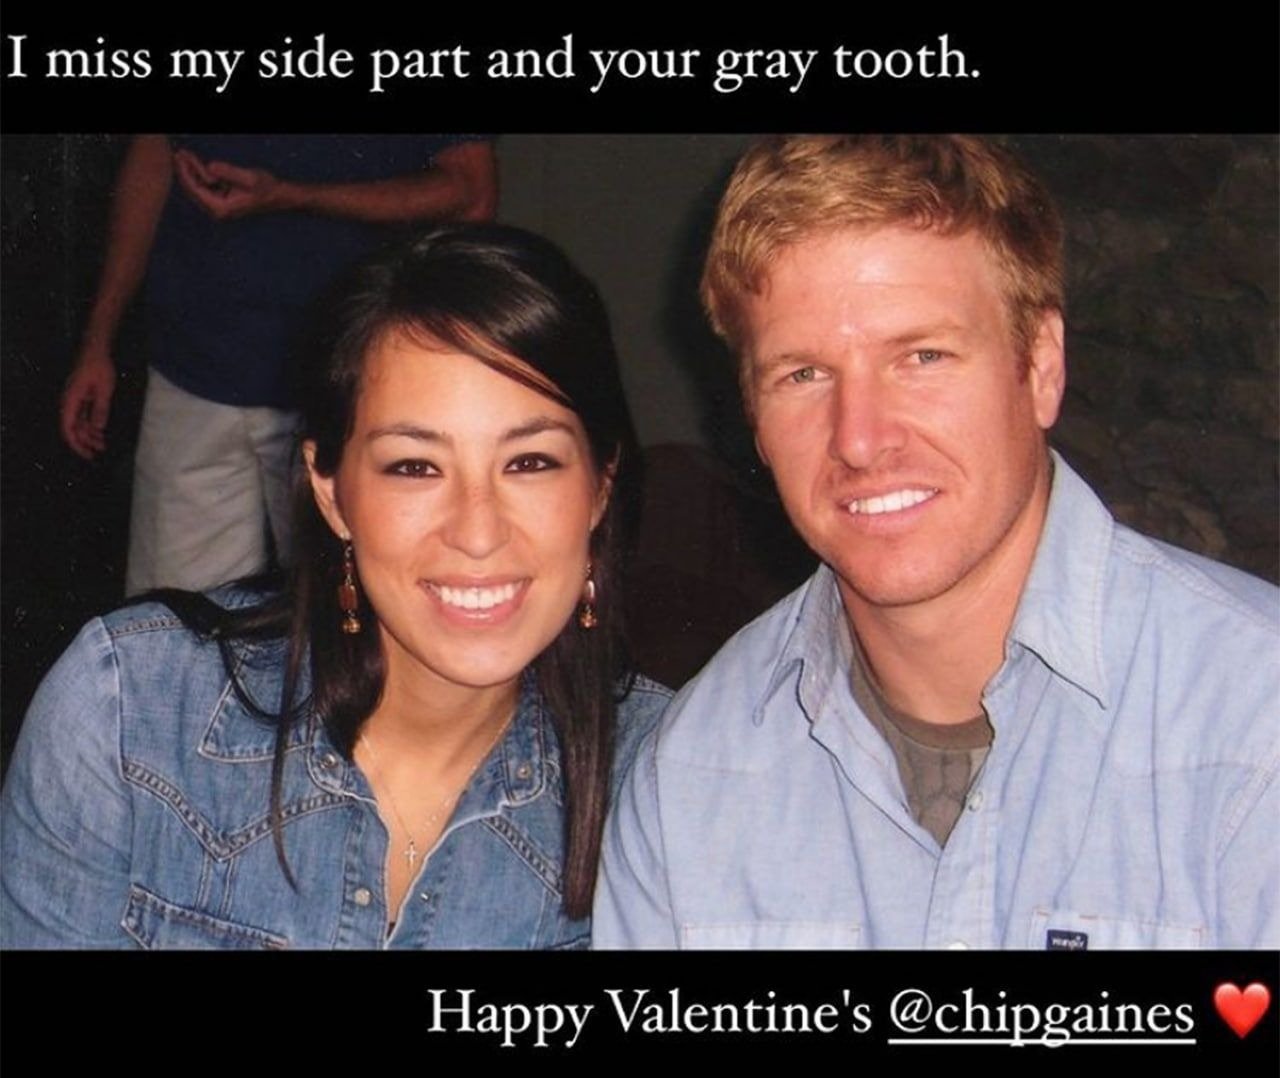 Joanna Gaines and Chip Gaines on their throwback photo | Source: Instagram/@joannagaines